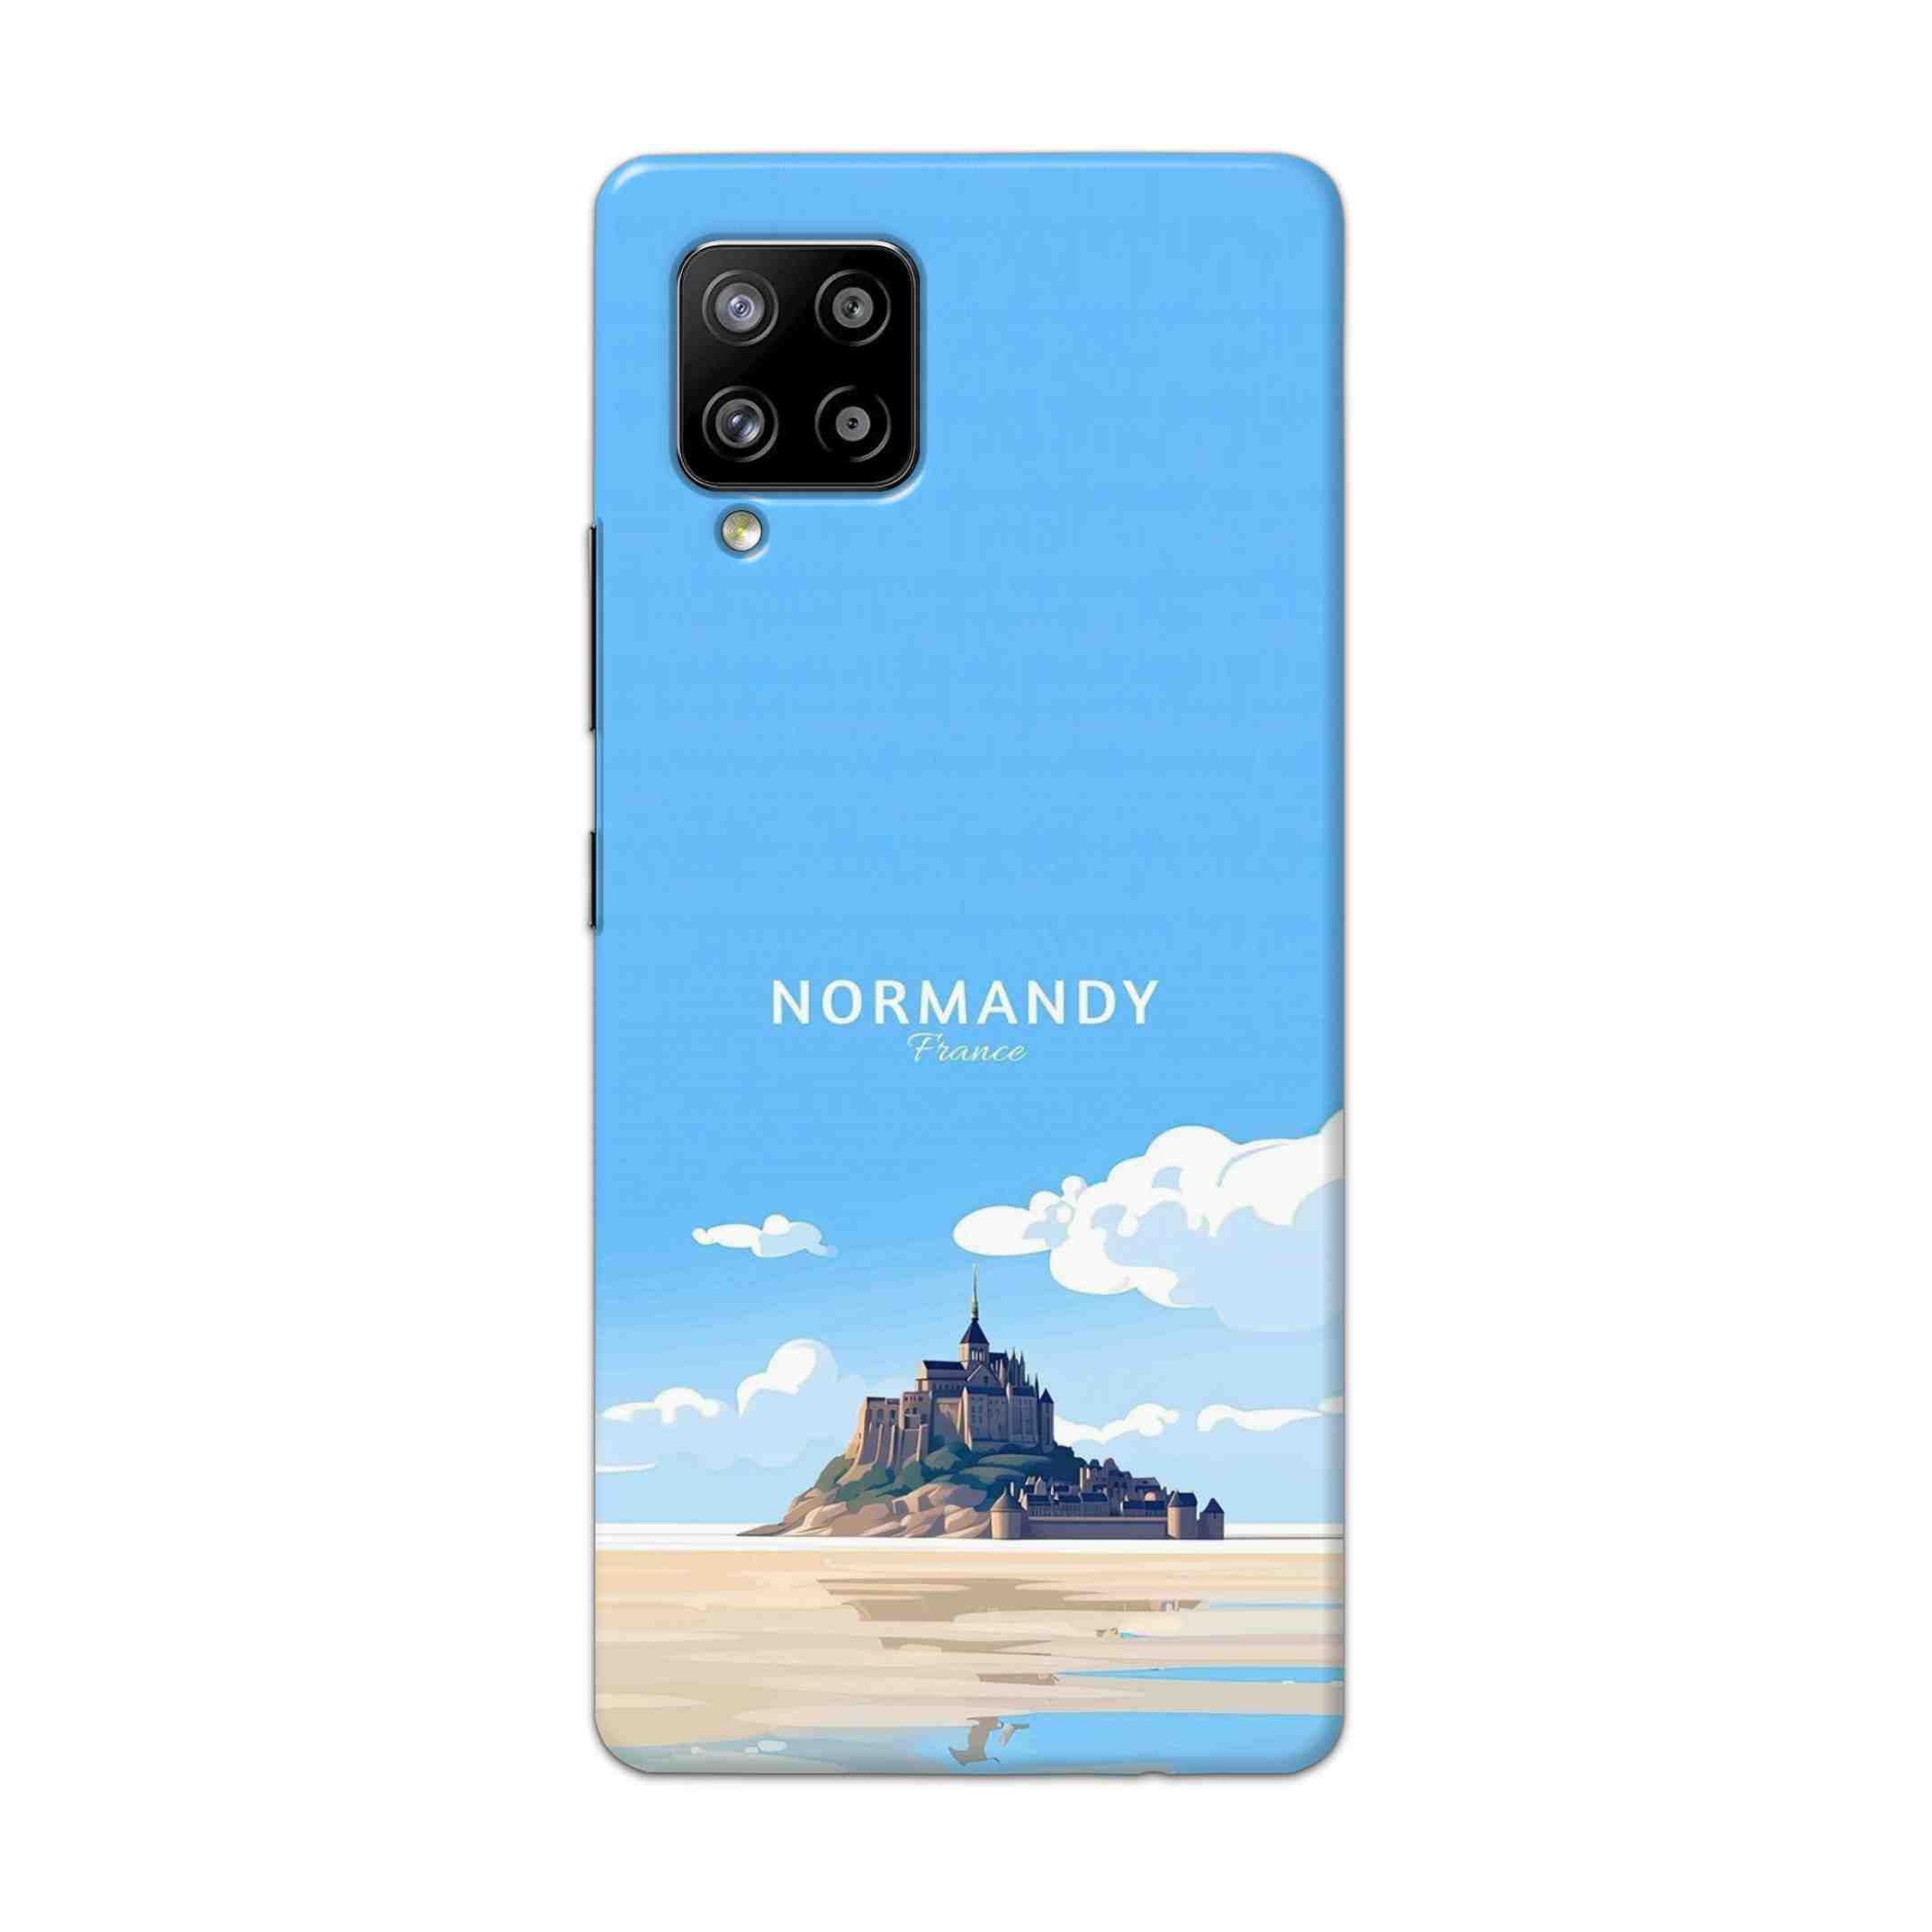 Buy Normandy Hard Back Mobile Phone Case Cover For Samsung Galaxy M42 Online